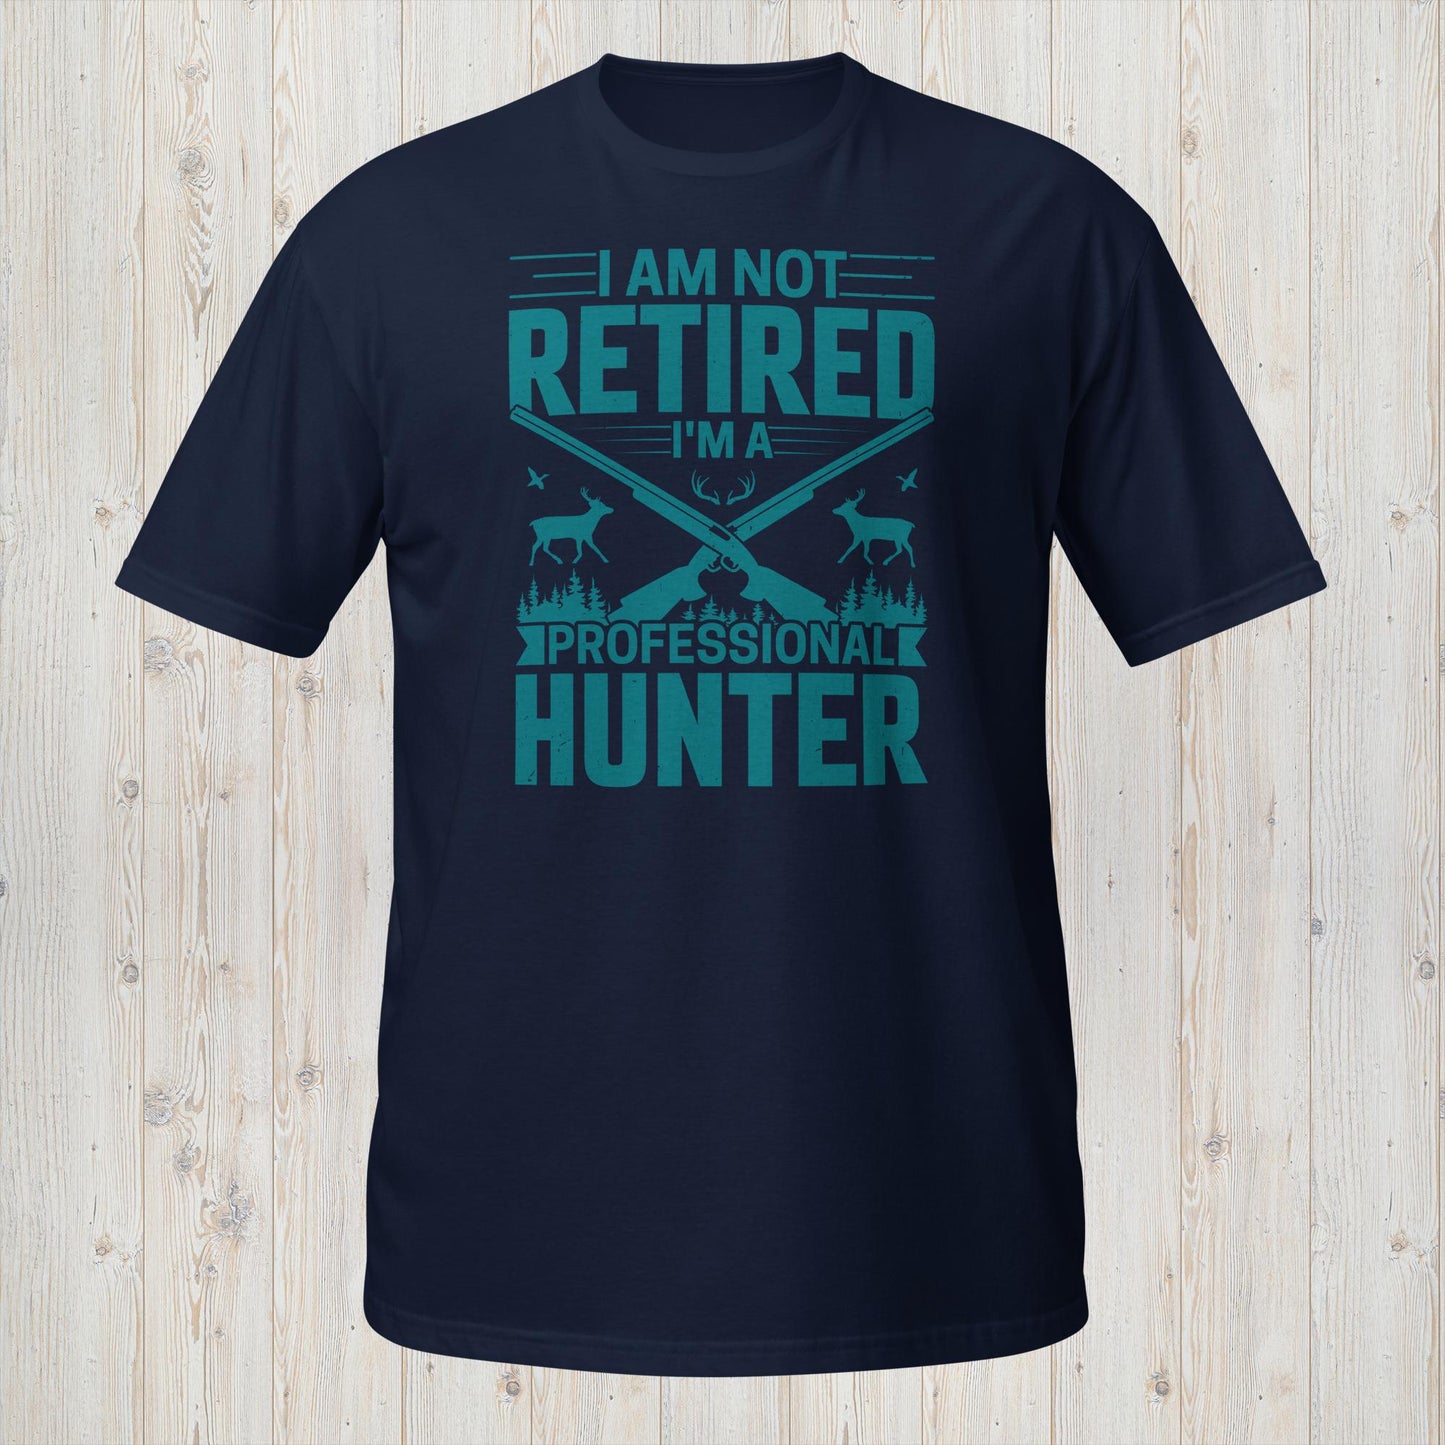 Professional Hunter Tee - Declare Your Passion for the Hunt